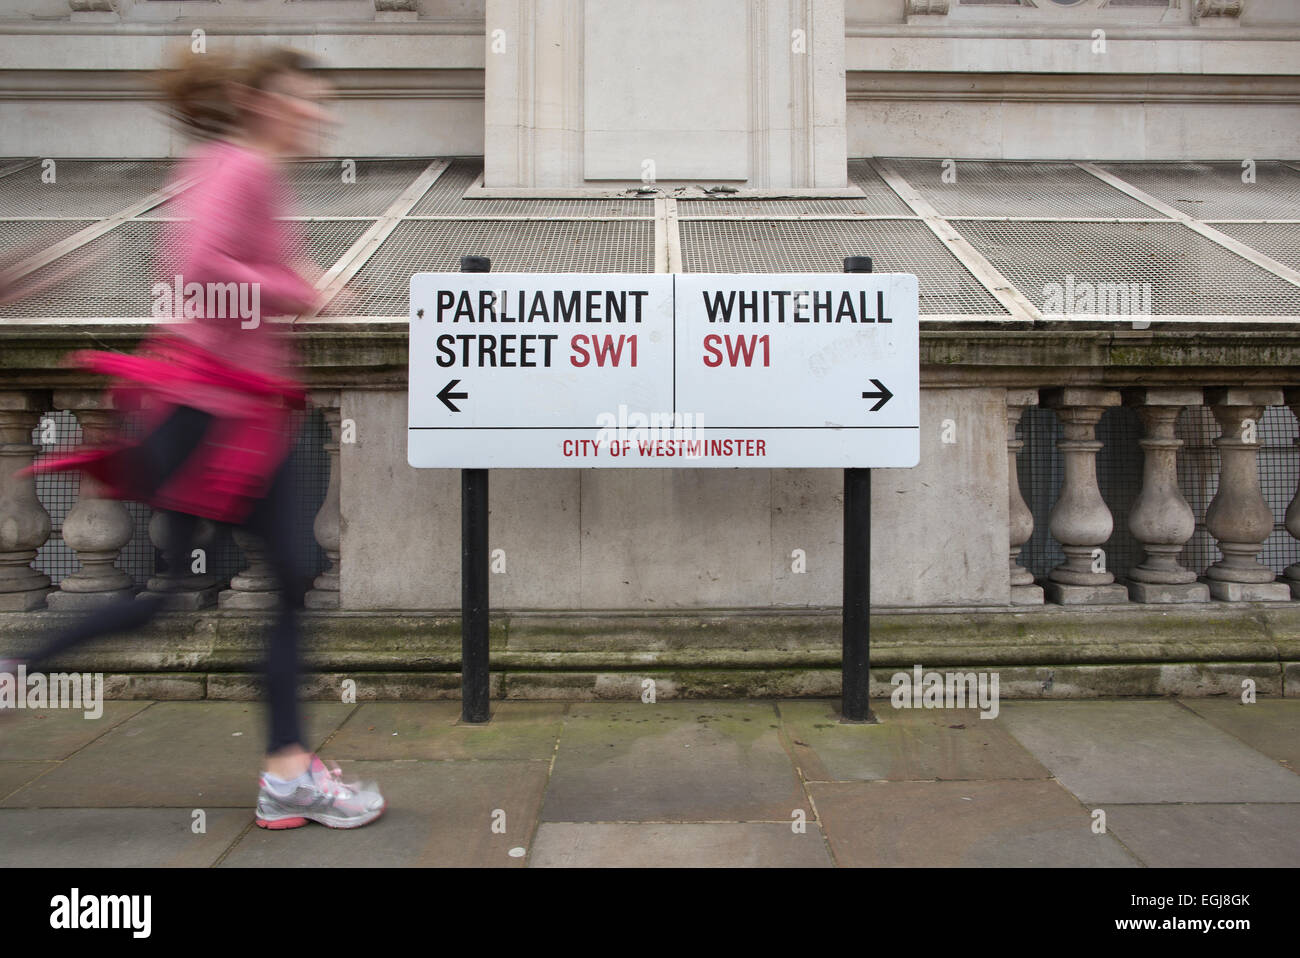 Whitehall and Parliament Street sign, Westminster, Central London, England, UK Stock Photo